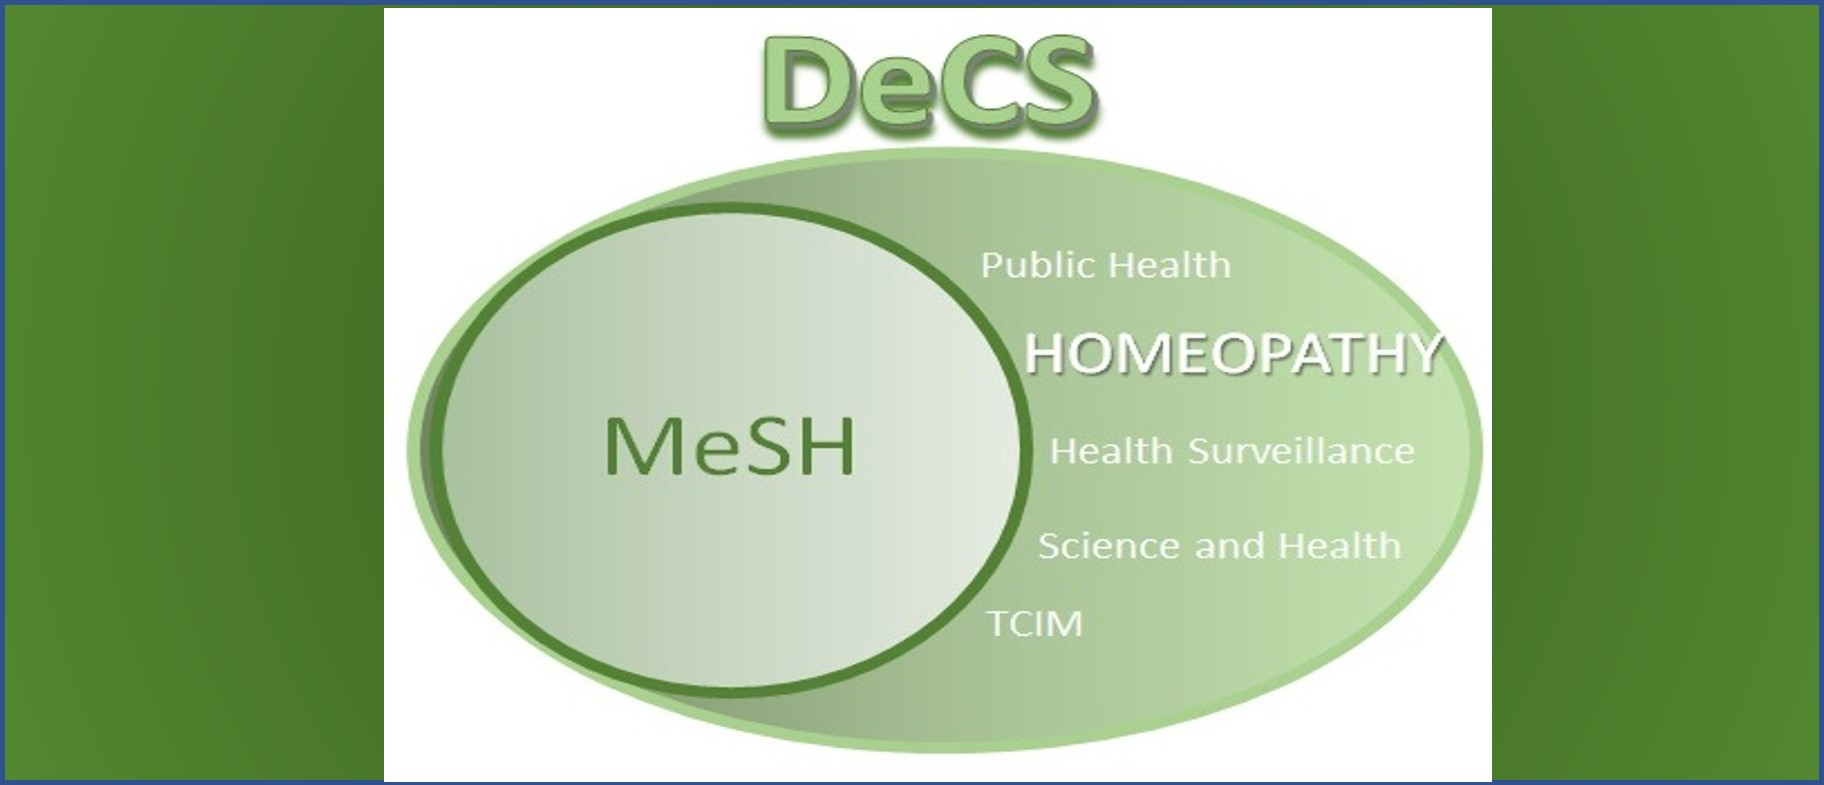 decs-homeopathy-category-is-updated